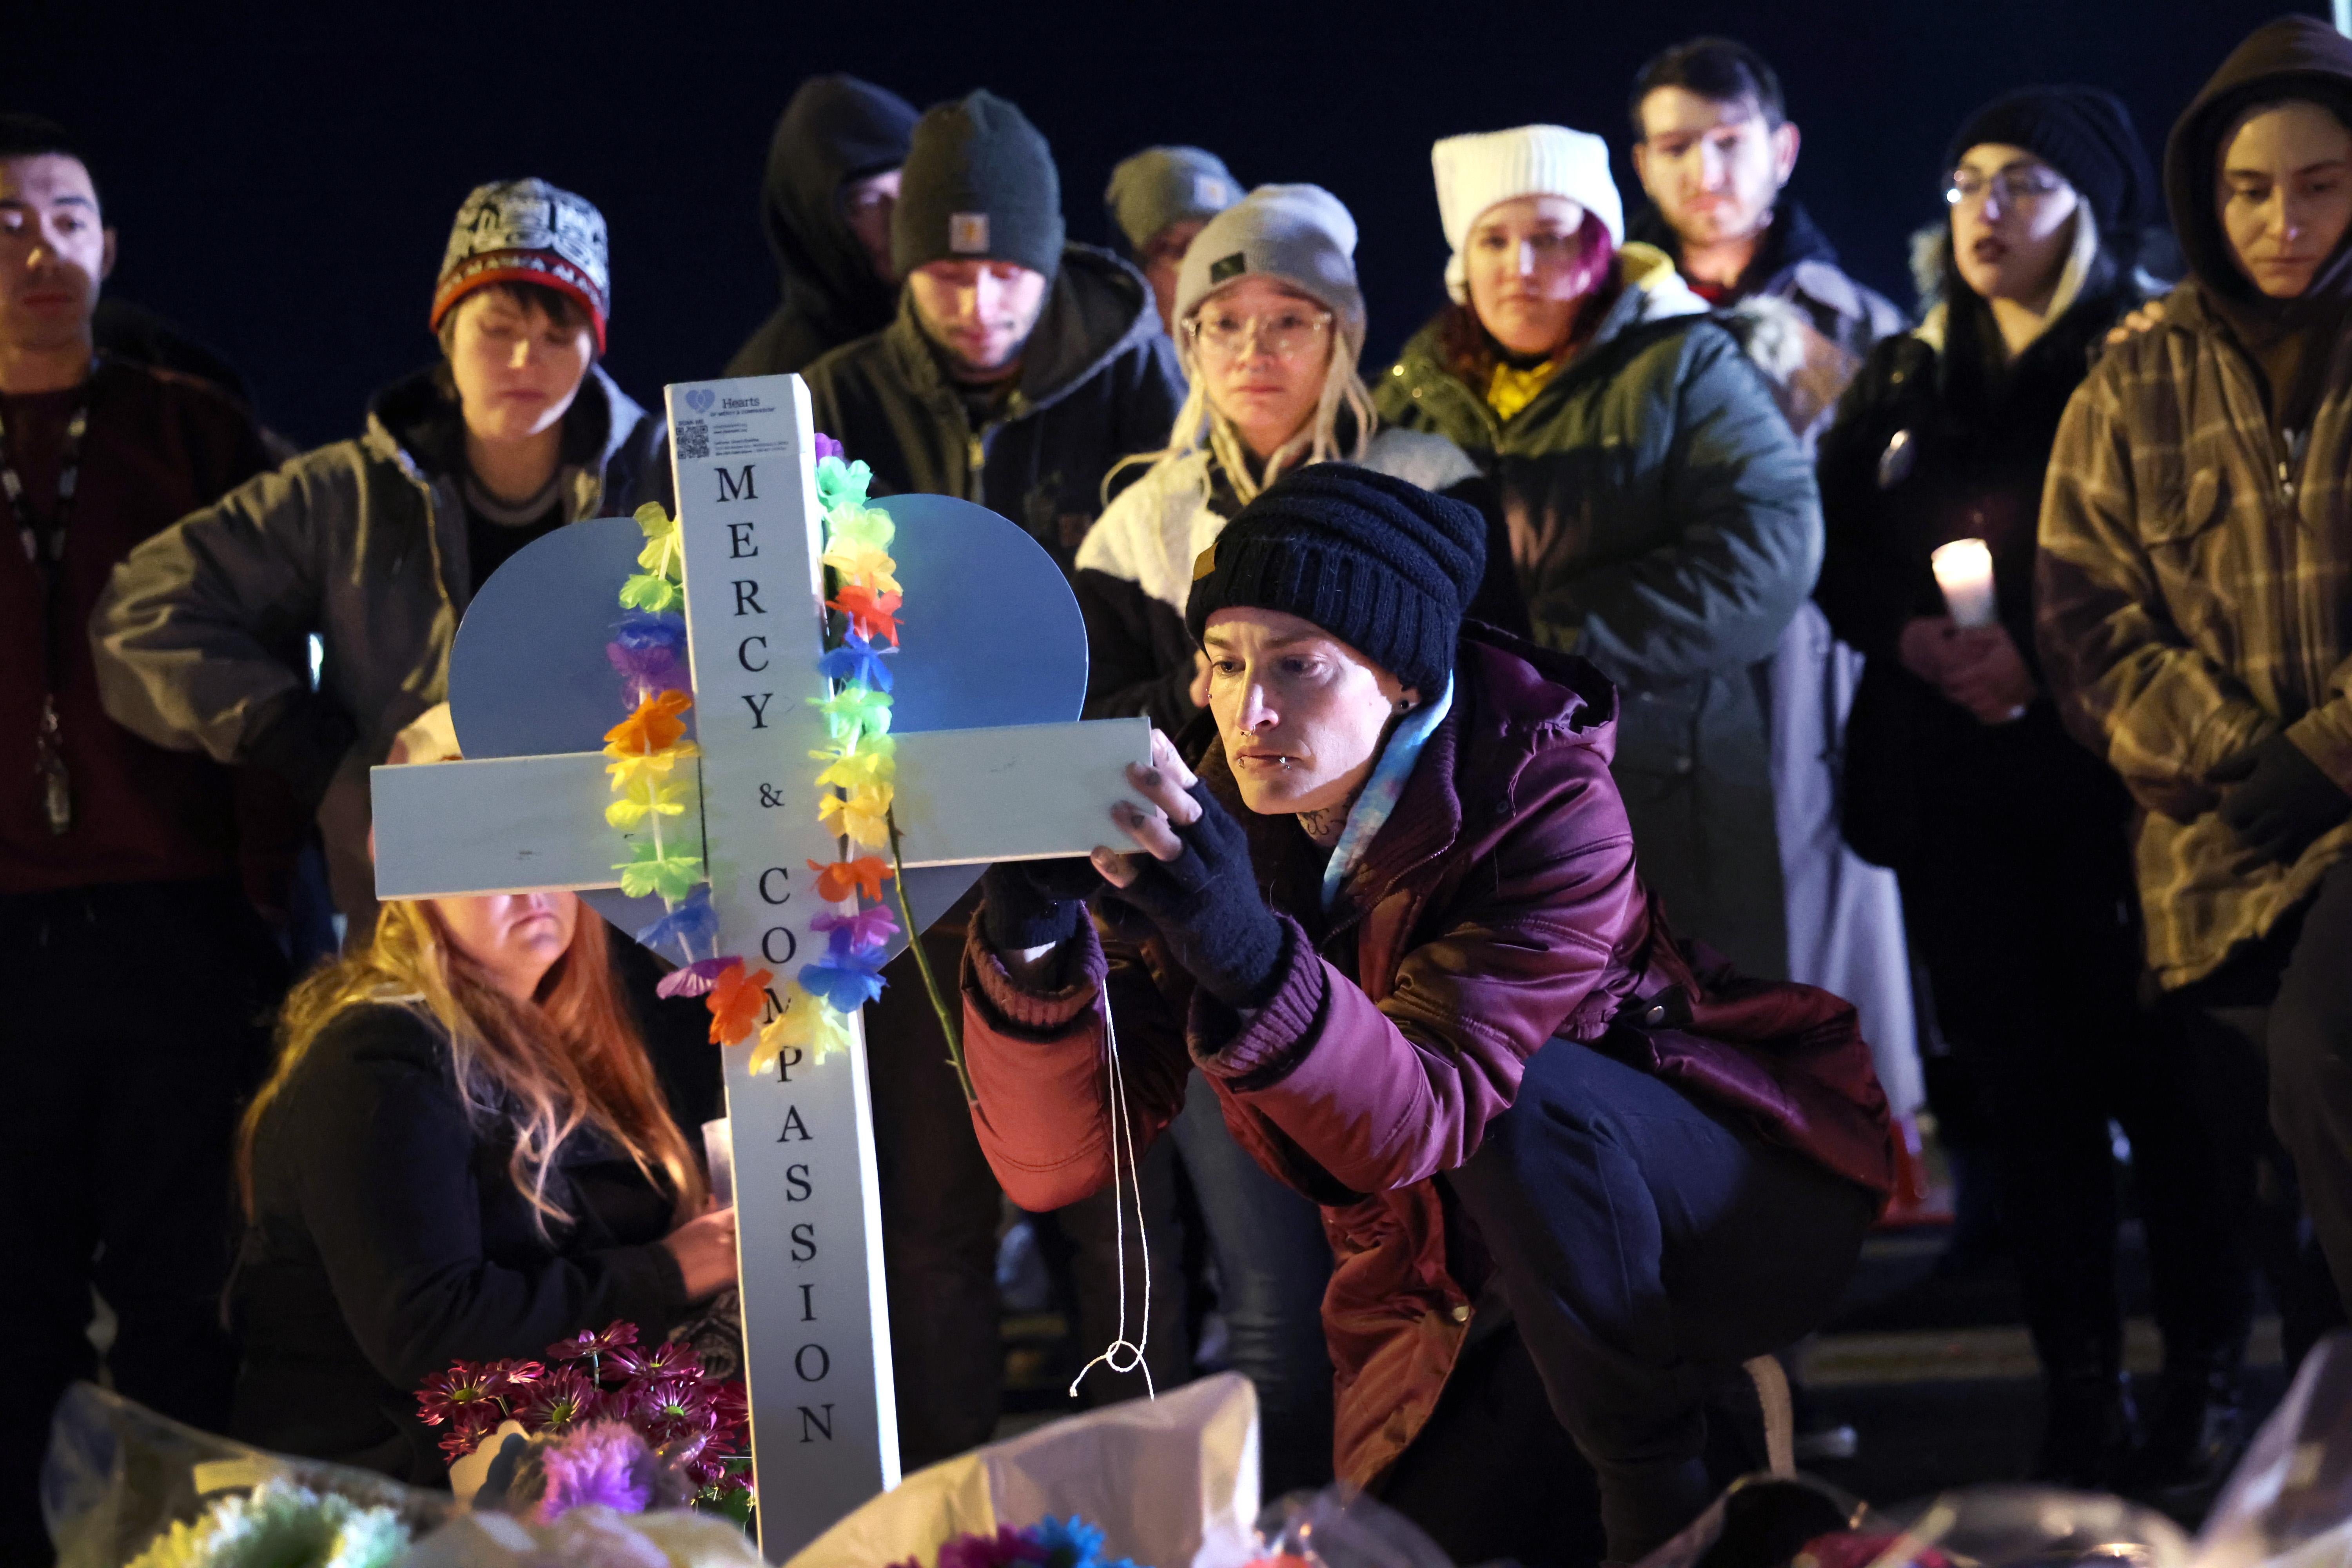 Mourners gather around a white cross with a rainbow-colored lei on it in the dark.